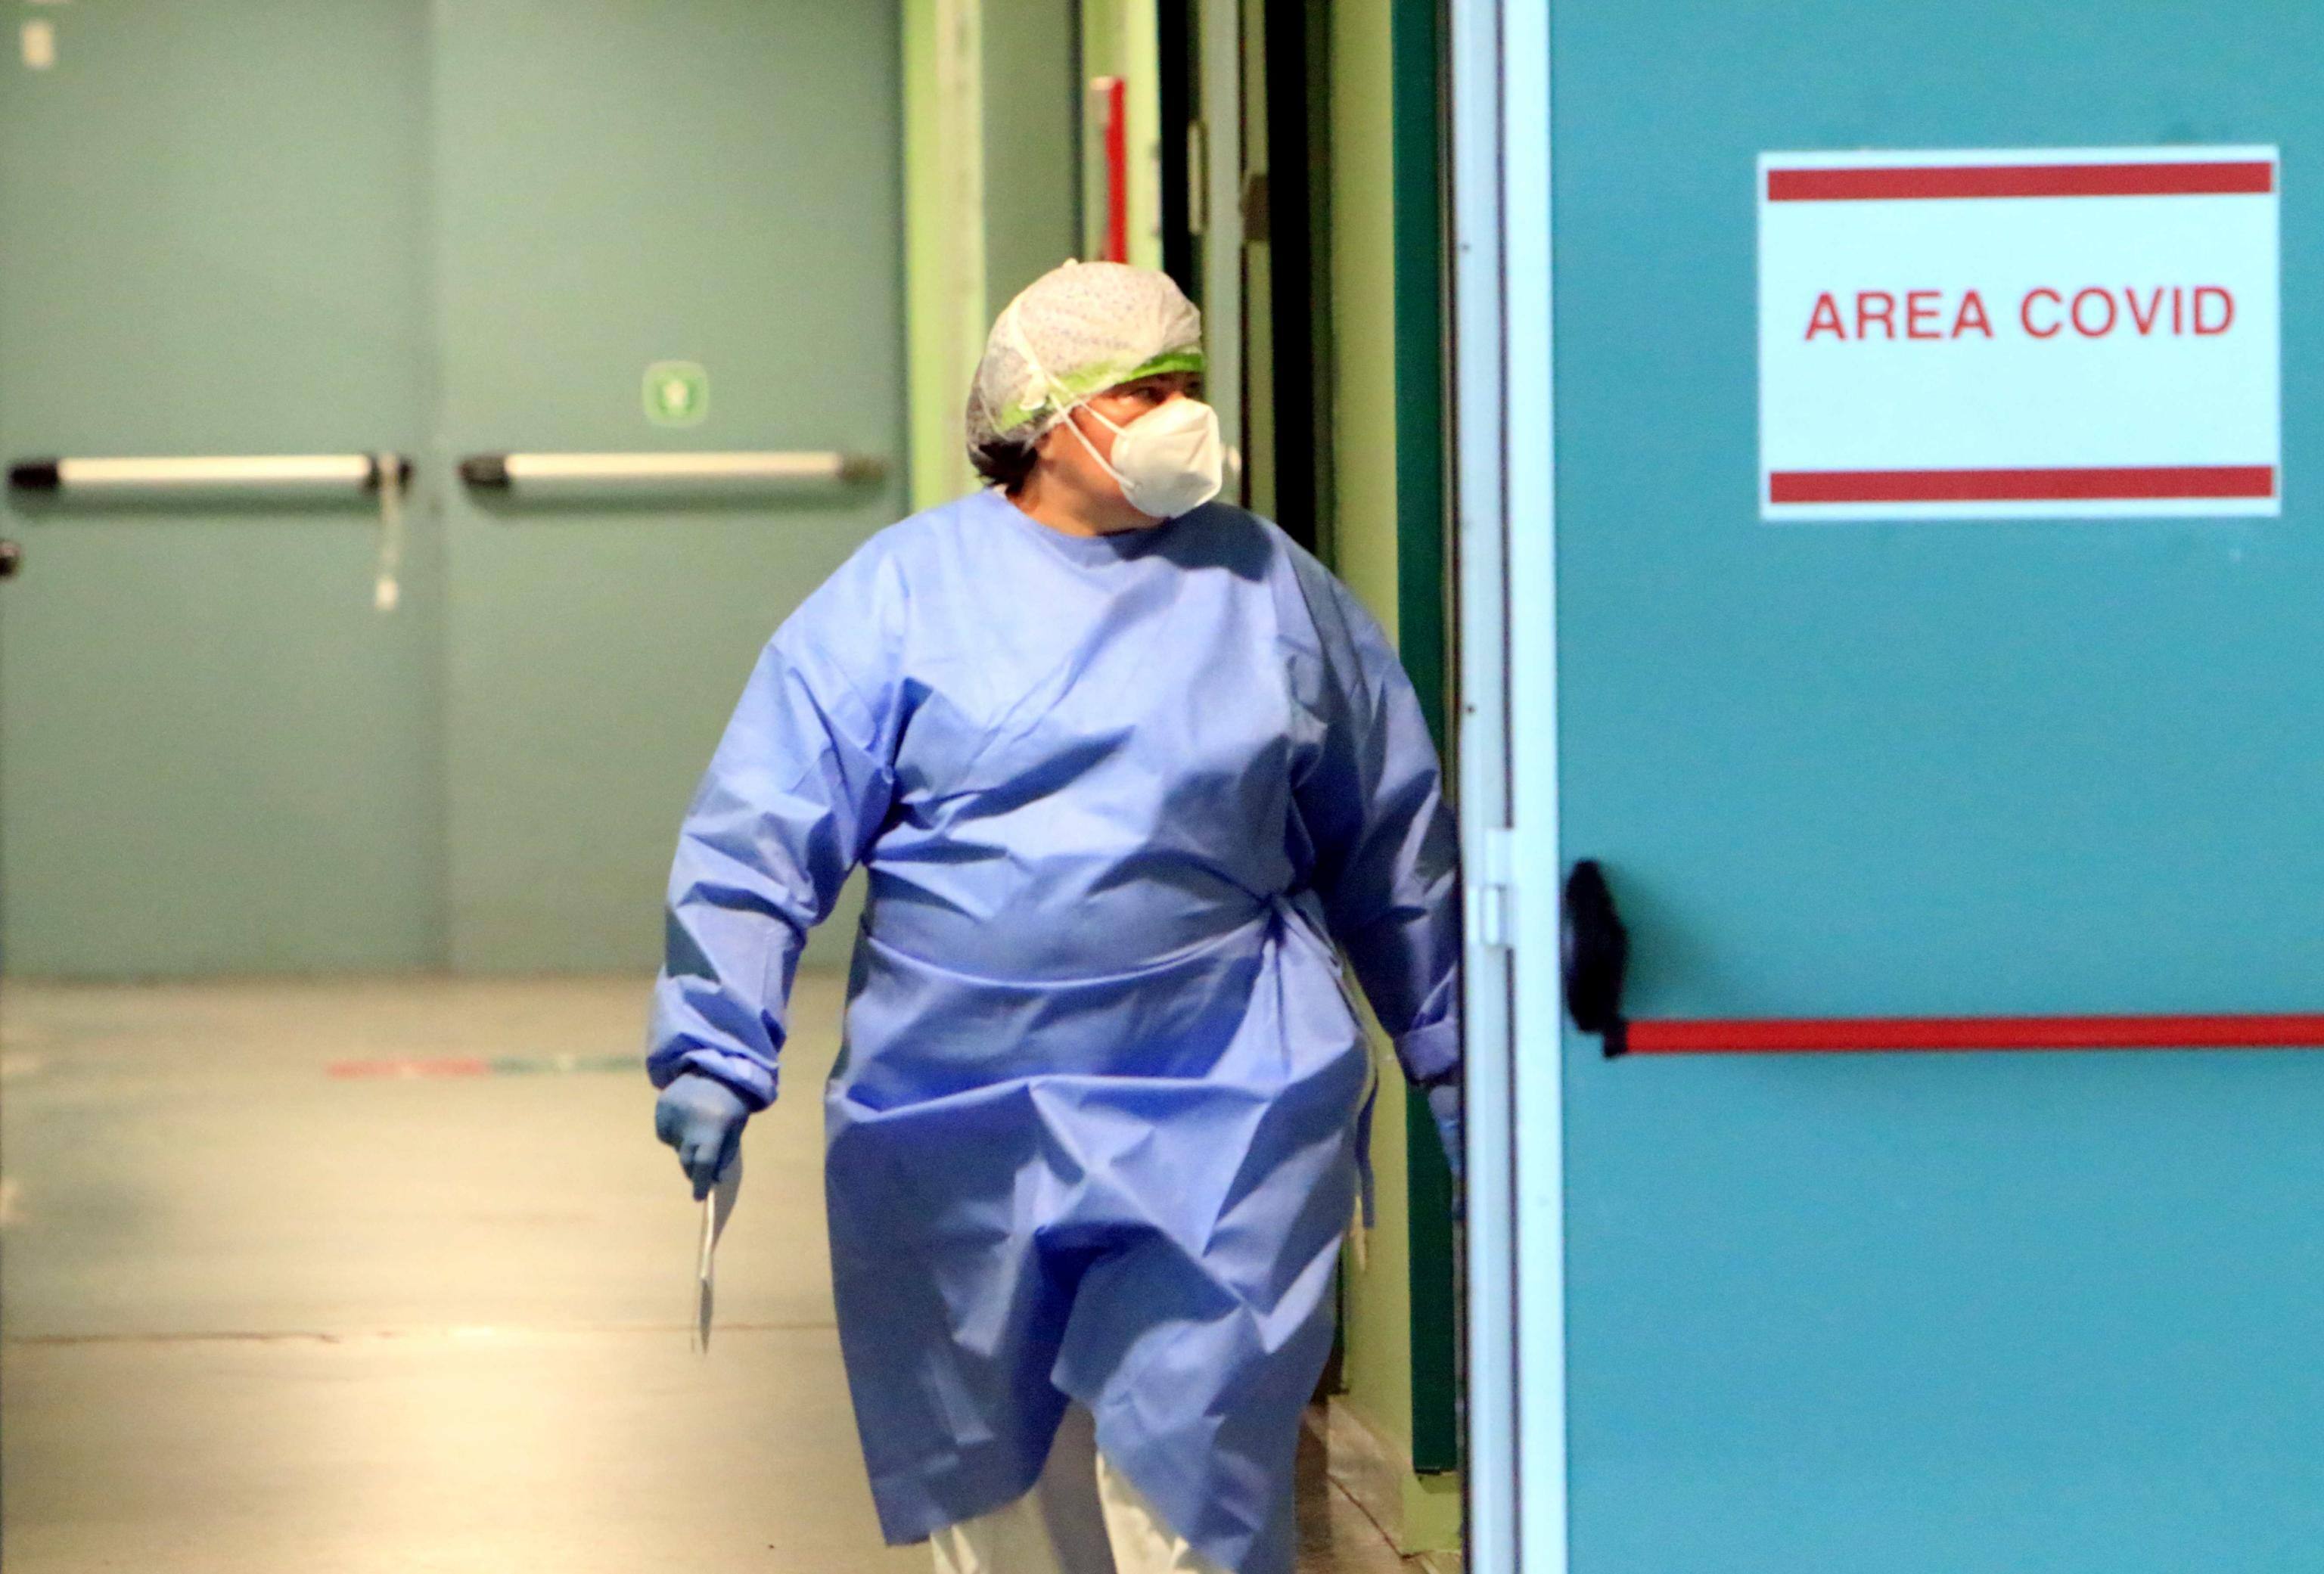 Doctors and nurses wearing protective equipment at work inside the Covid area of the Niguarda hospital's Emergency Room in Milan, Italy, 28 October 2020. ANSA / PAOLO SALMOIRAGO